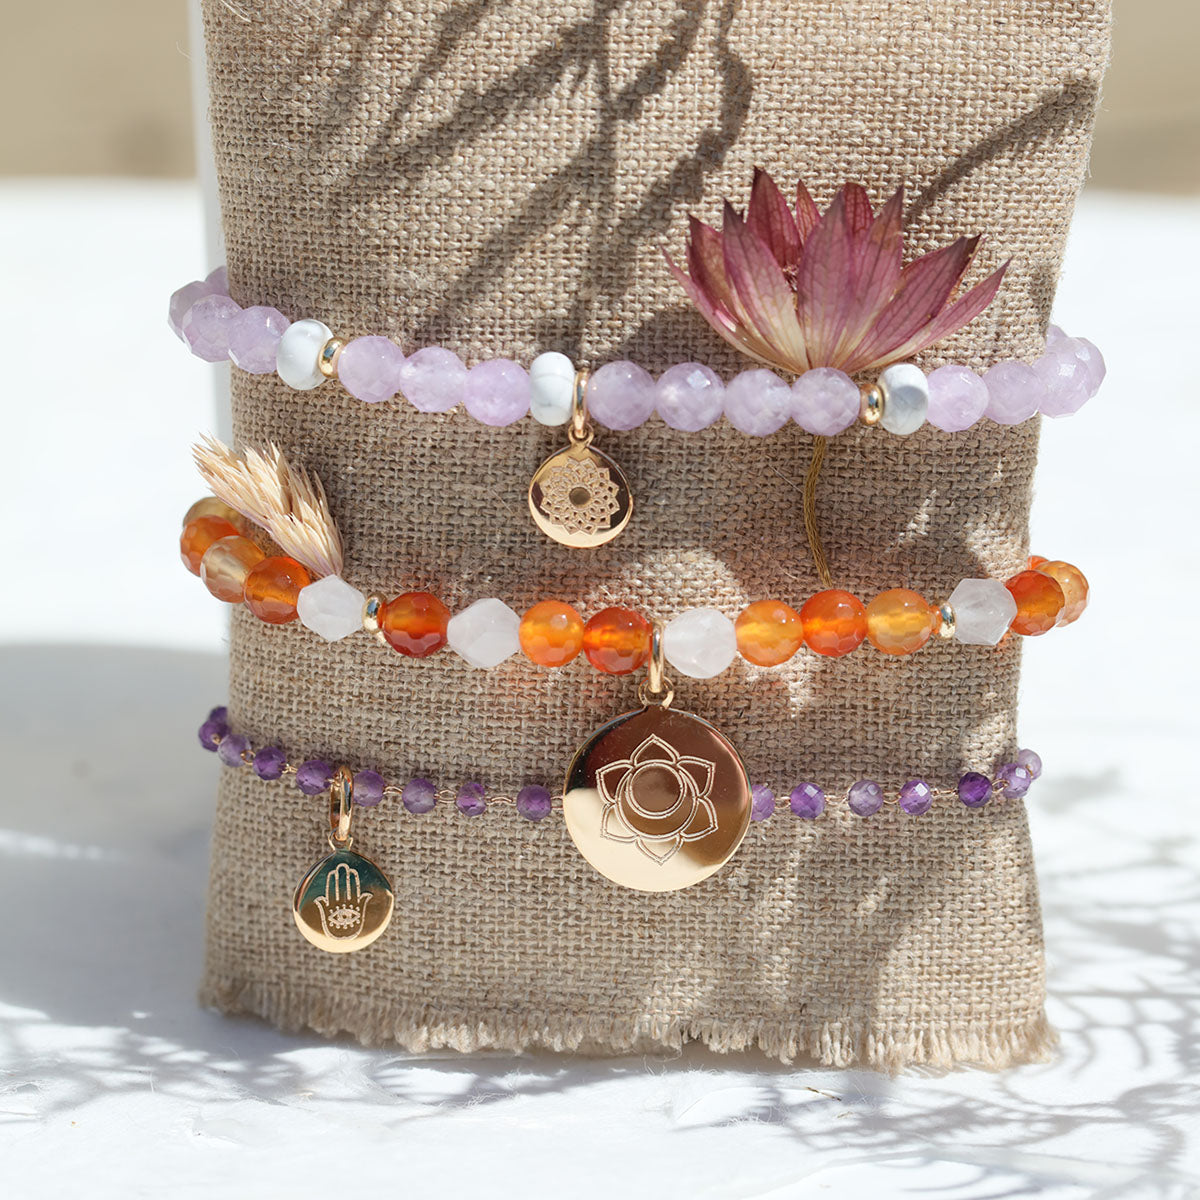 Amethyst Vibes - chakra couronne